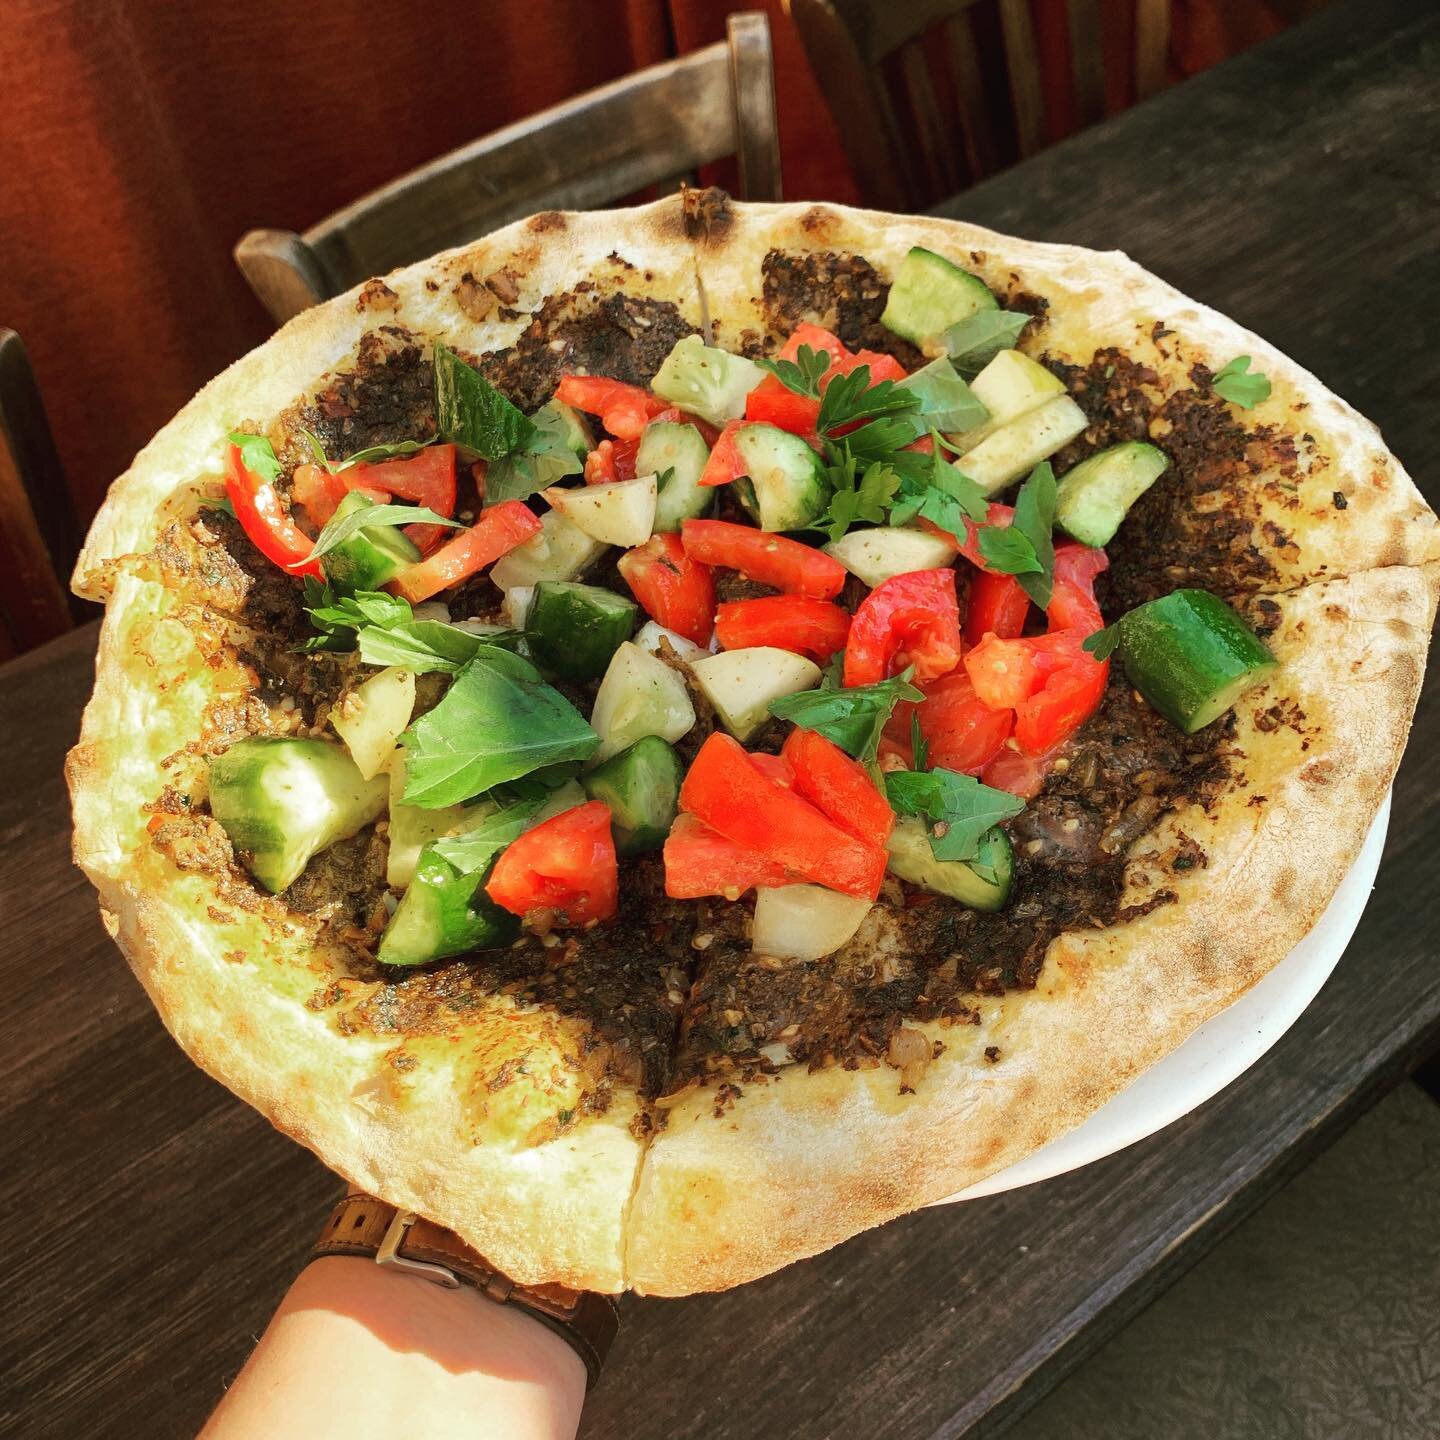 Lahmacun (pronounced lama-joun) is joining the menu! A dreamy vegan flatbread, spread with a paste of spiced crimini mushrooms and pine nuts and topped with fresh early girl tomatoes, cucumbers and herbs. Typically made with meat, this is a popular d